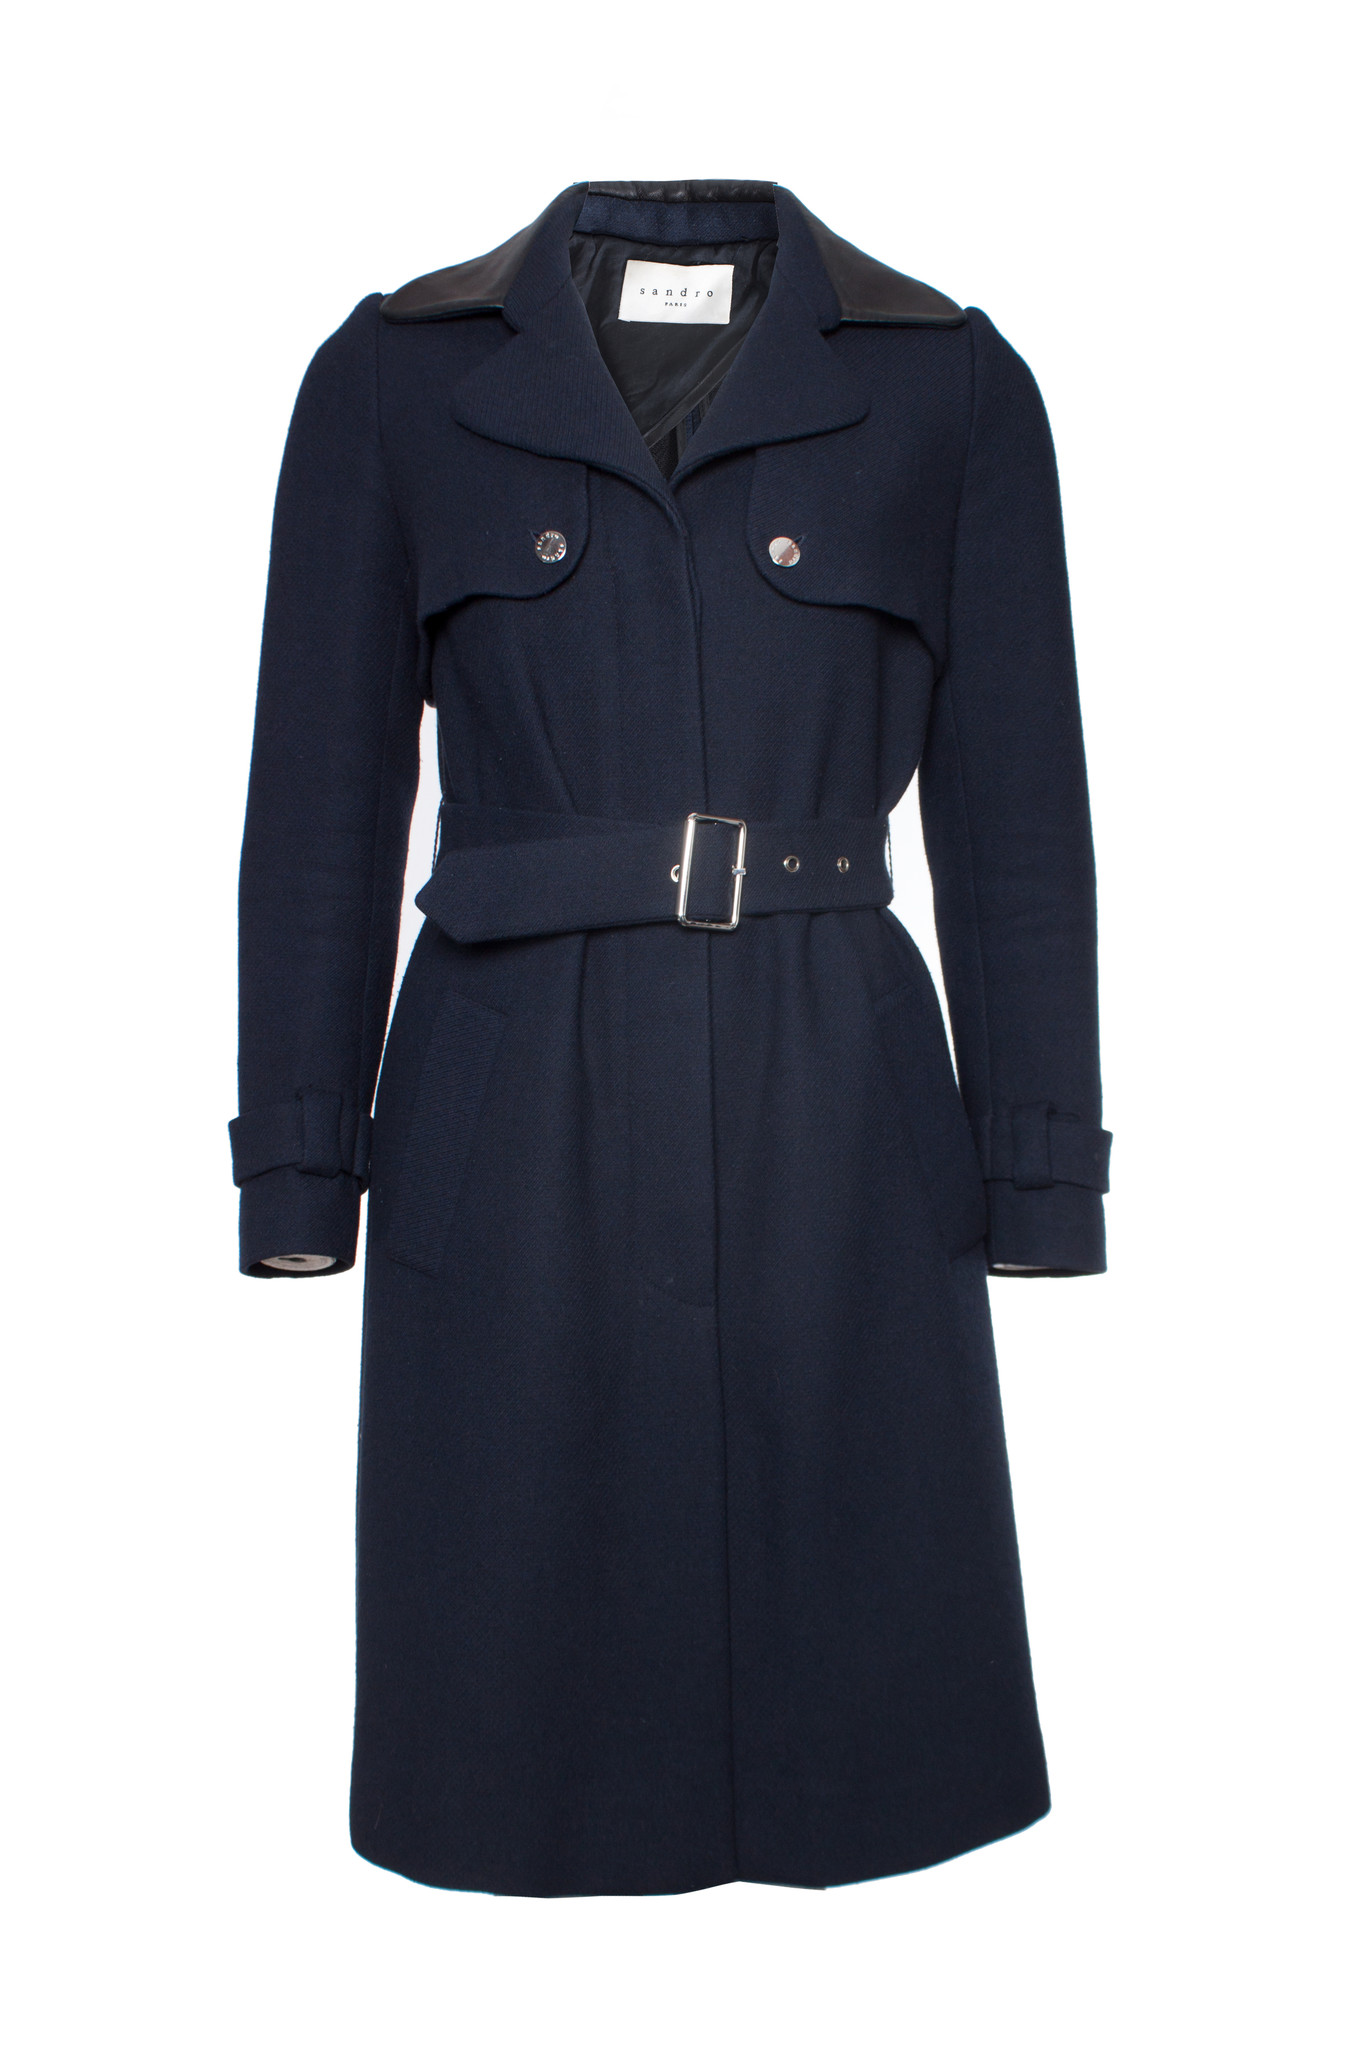 Sandro, Blue woolen trench coat with leather collar in size FR36/XS ...